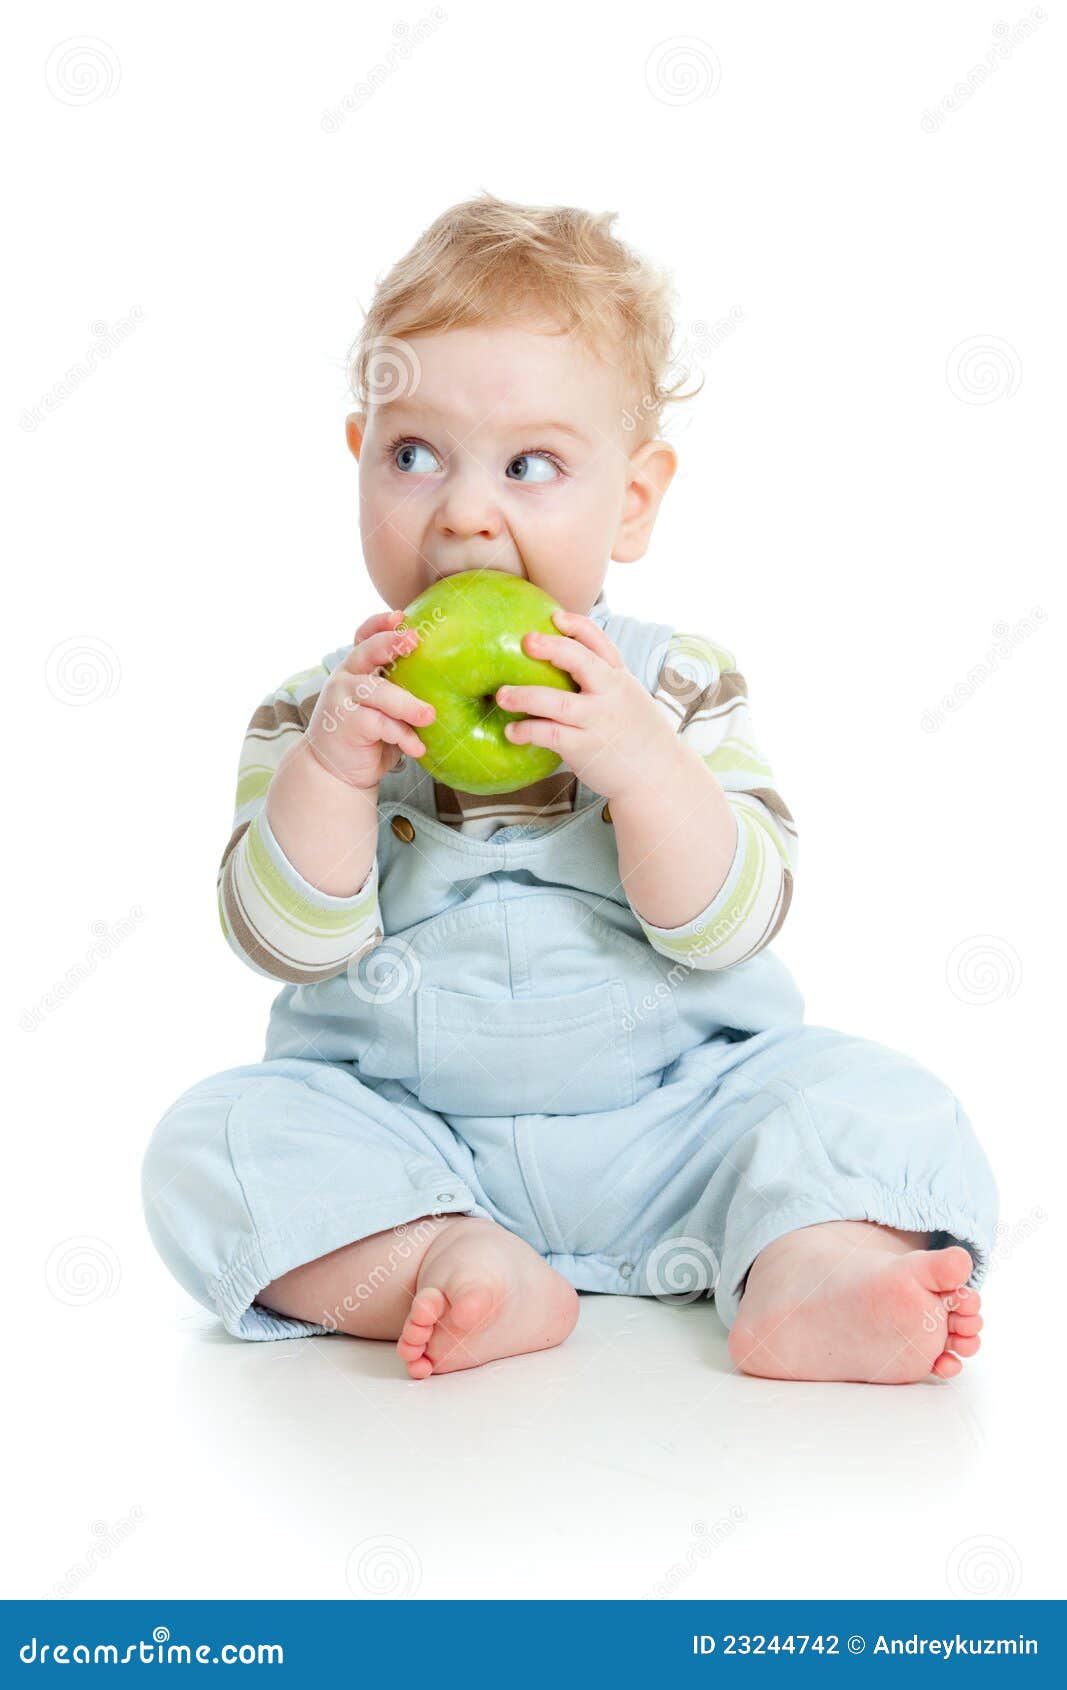 Baby Boy Eating Healthy Food Stock Photography - Image: 23244742